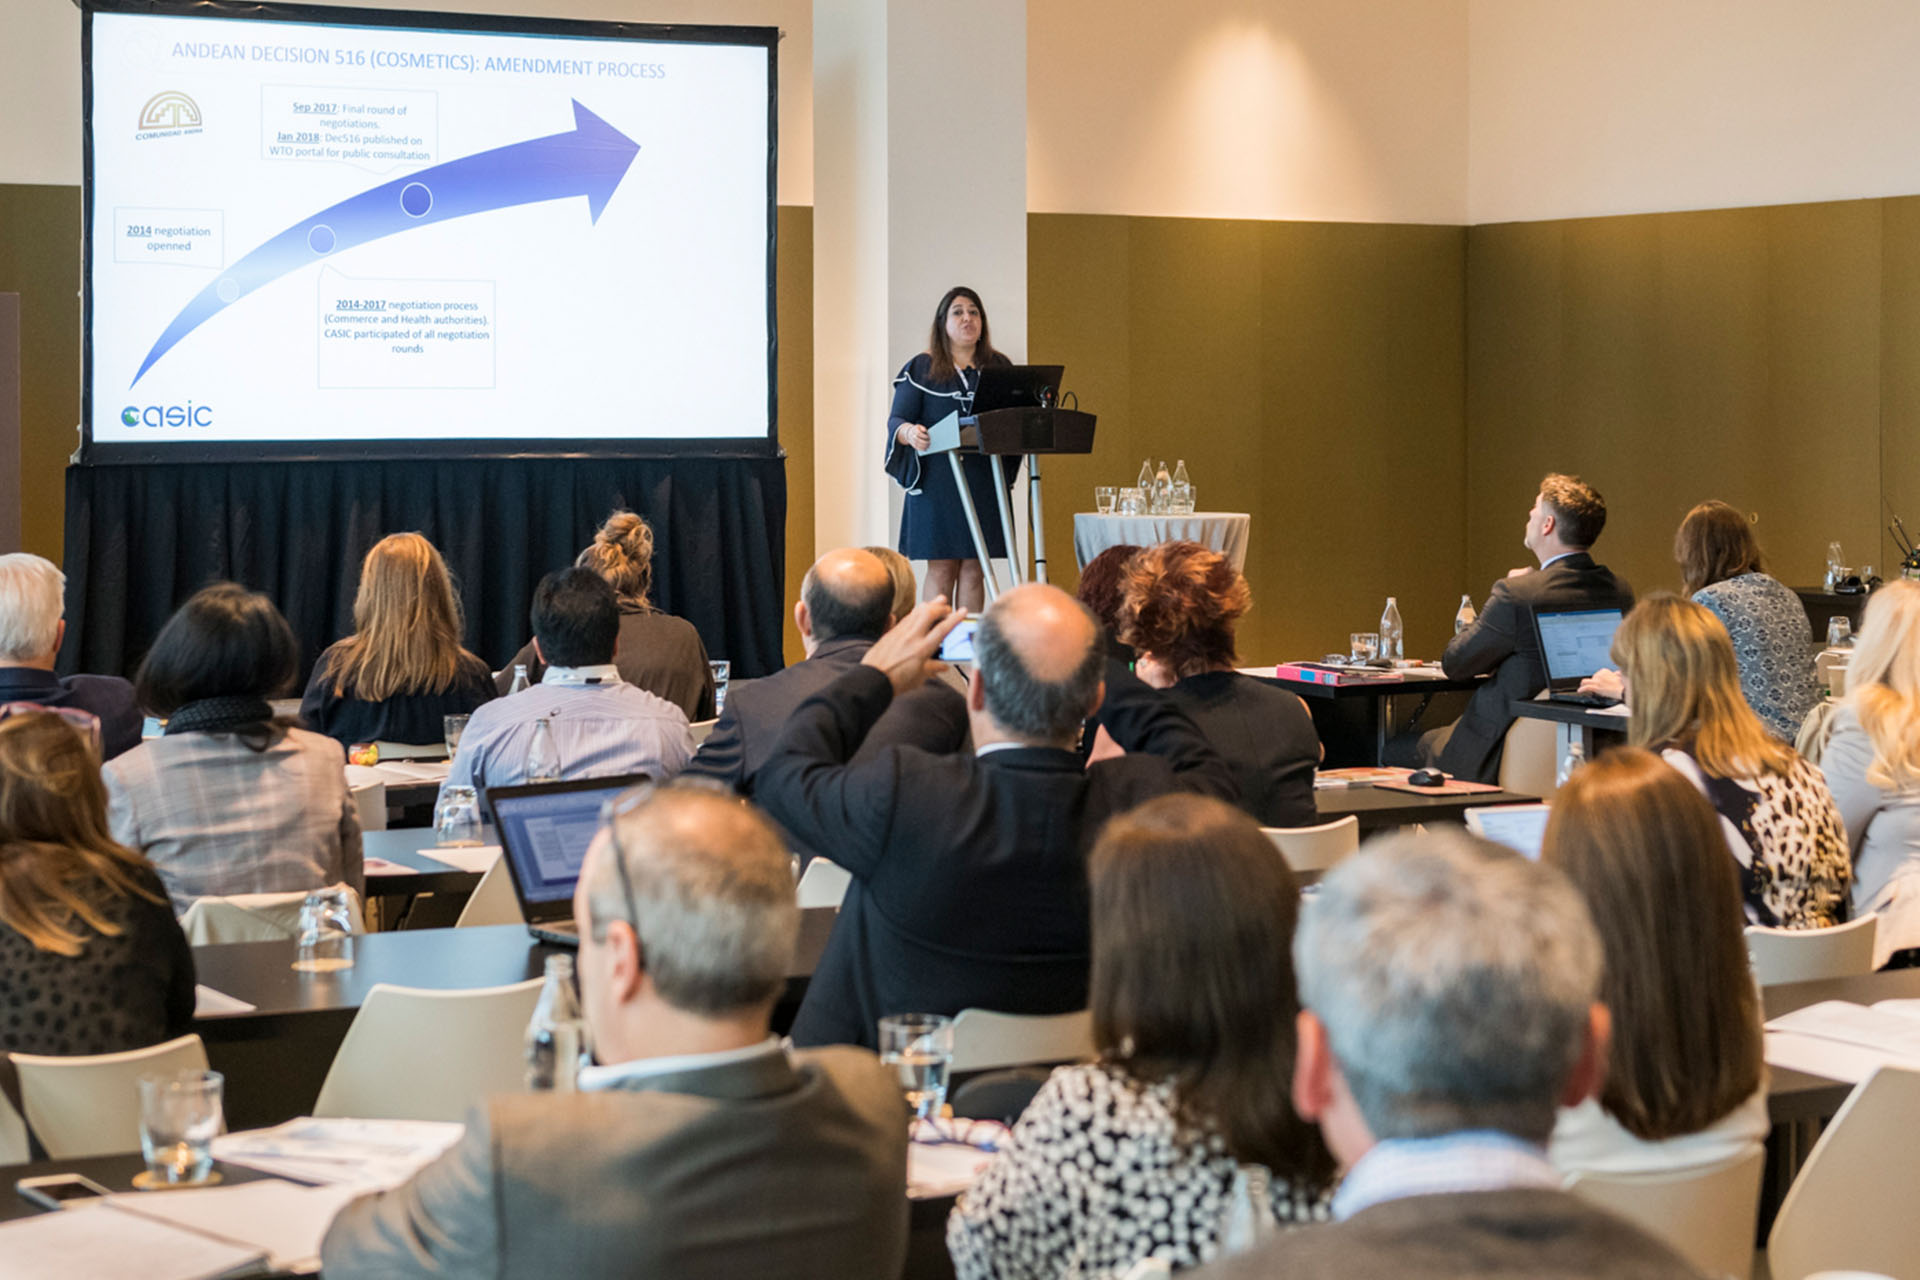 The 2018 conference hosted over 100 regulatory and marketing professionals from the cosmetics industry